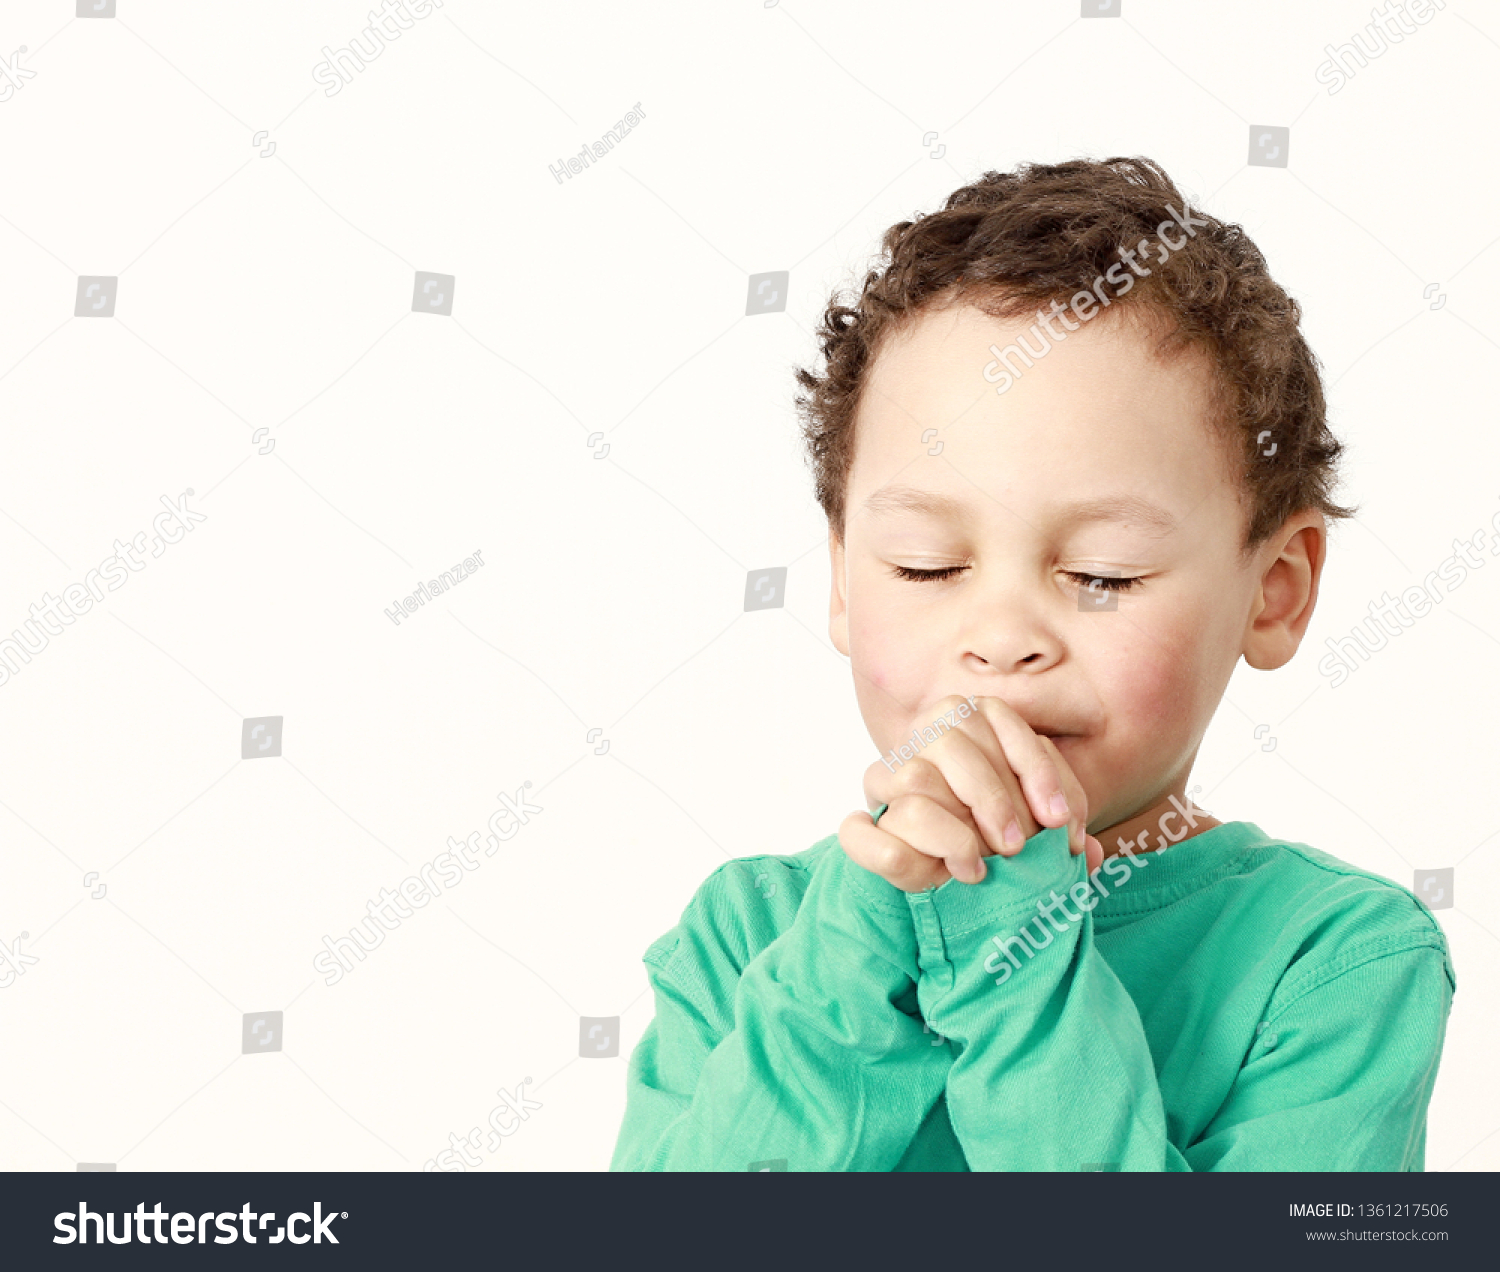 child praying to God with hands held together and head bowed low on white background stock image and stock photo #1361217506